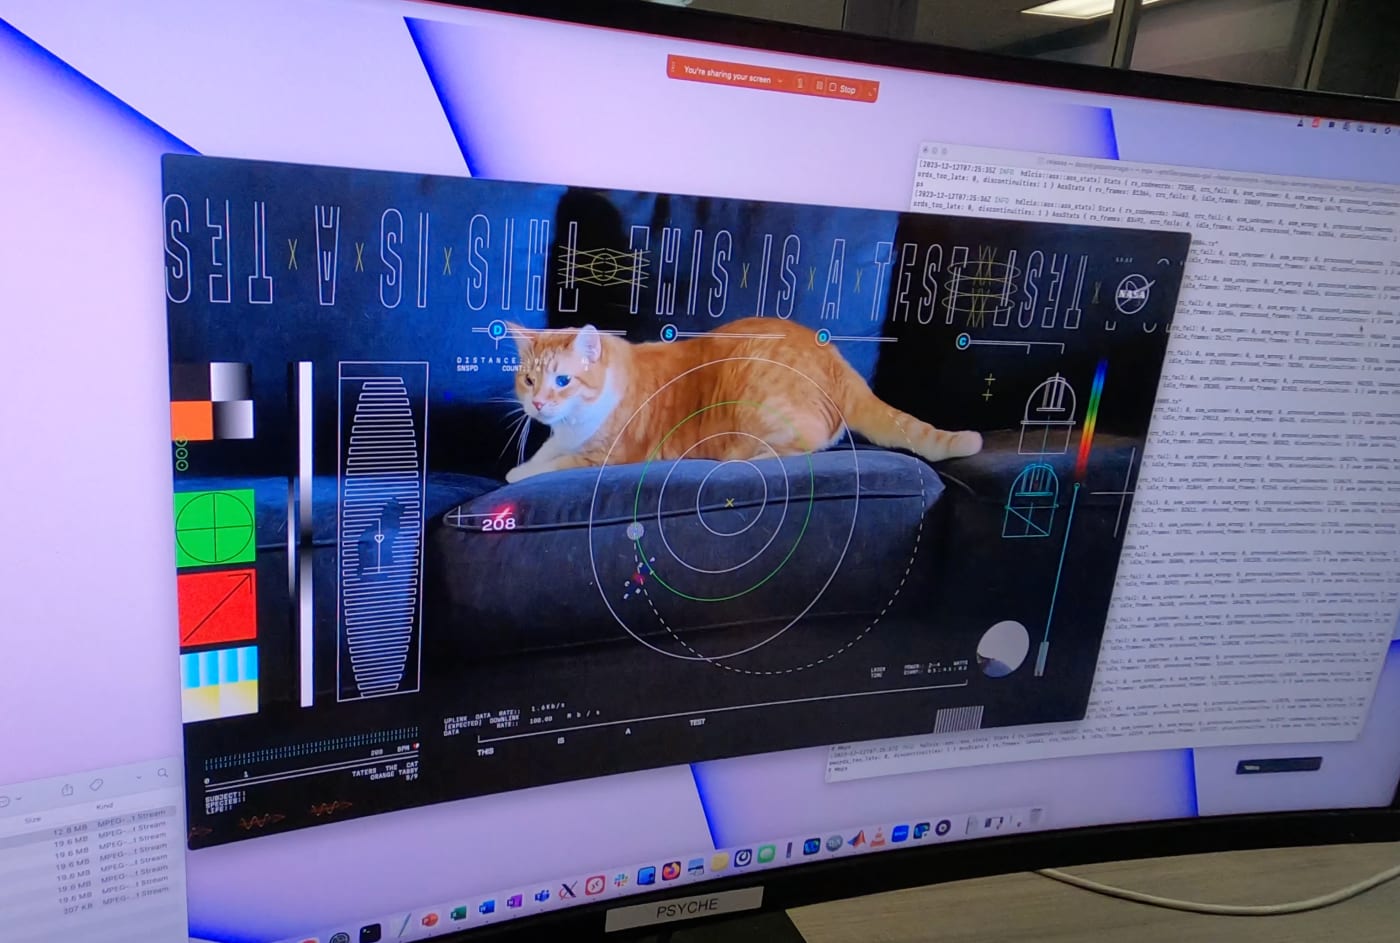 NASA beamed a video of a cat named Taters from deep space to Earth